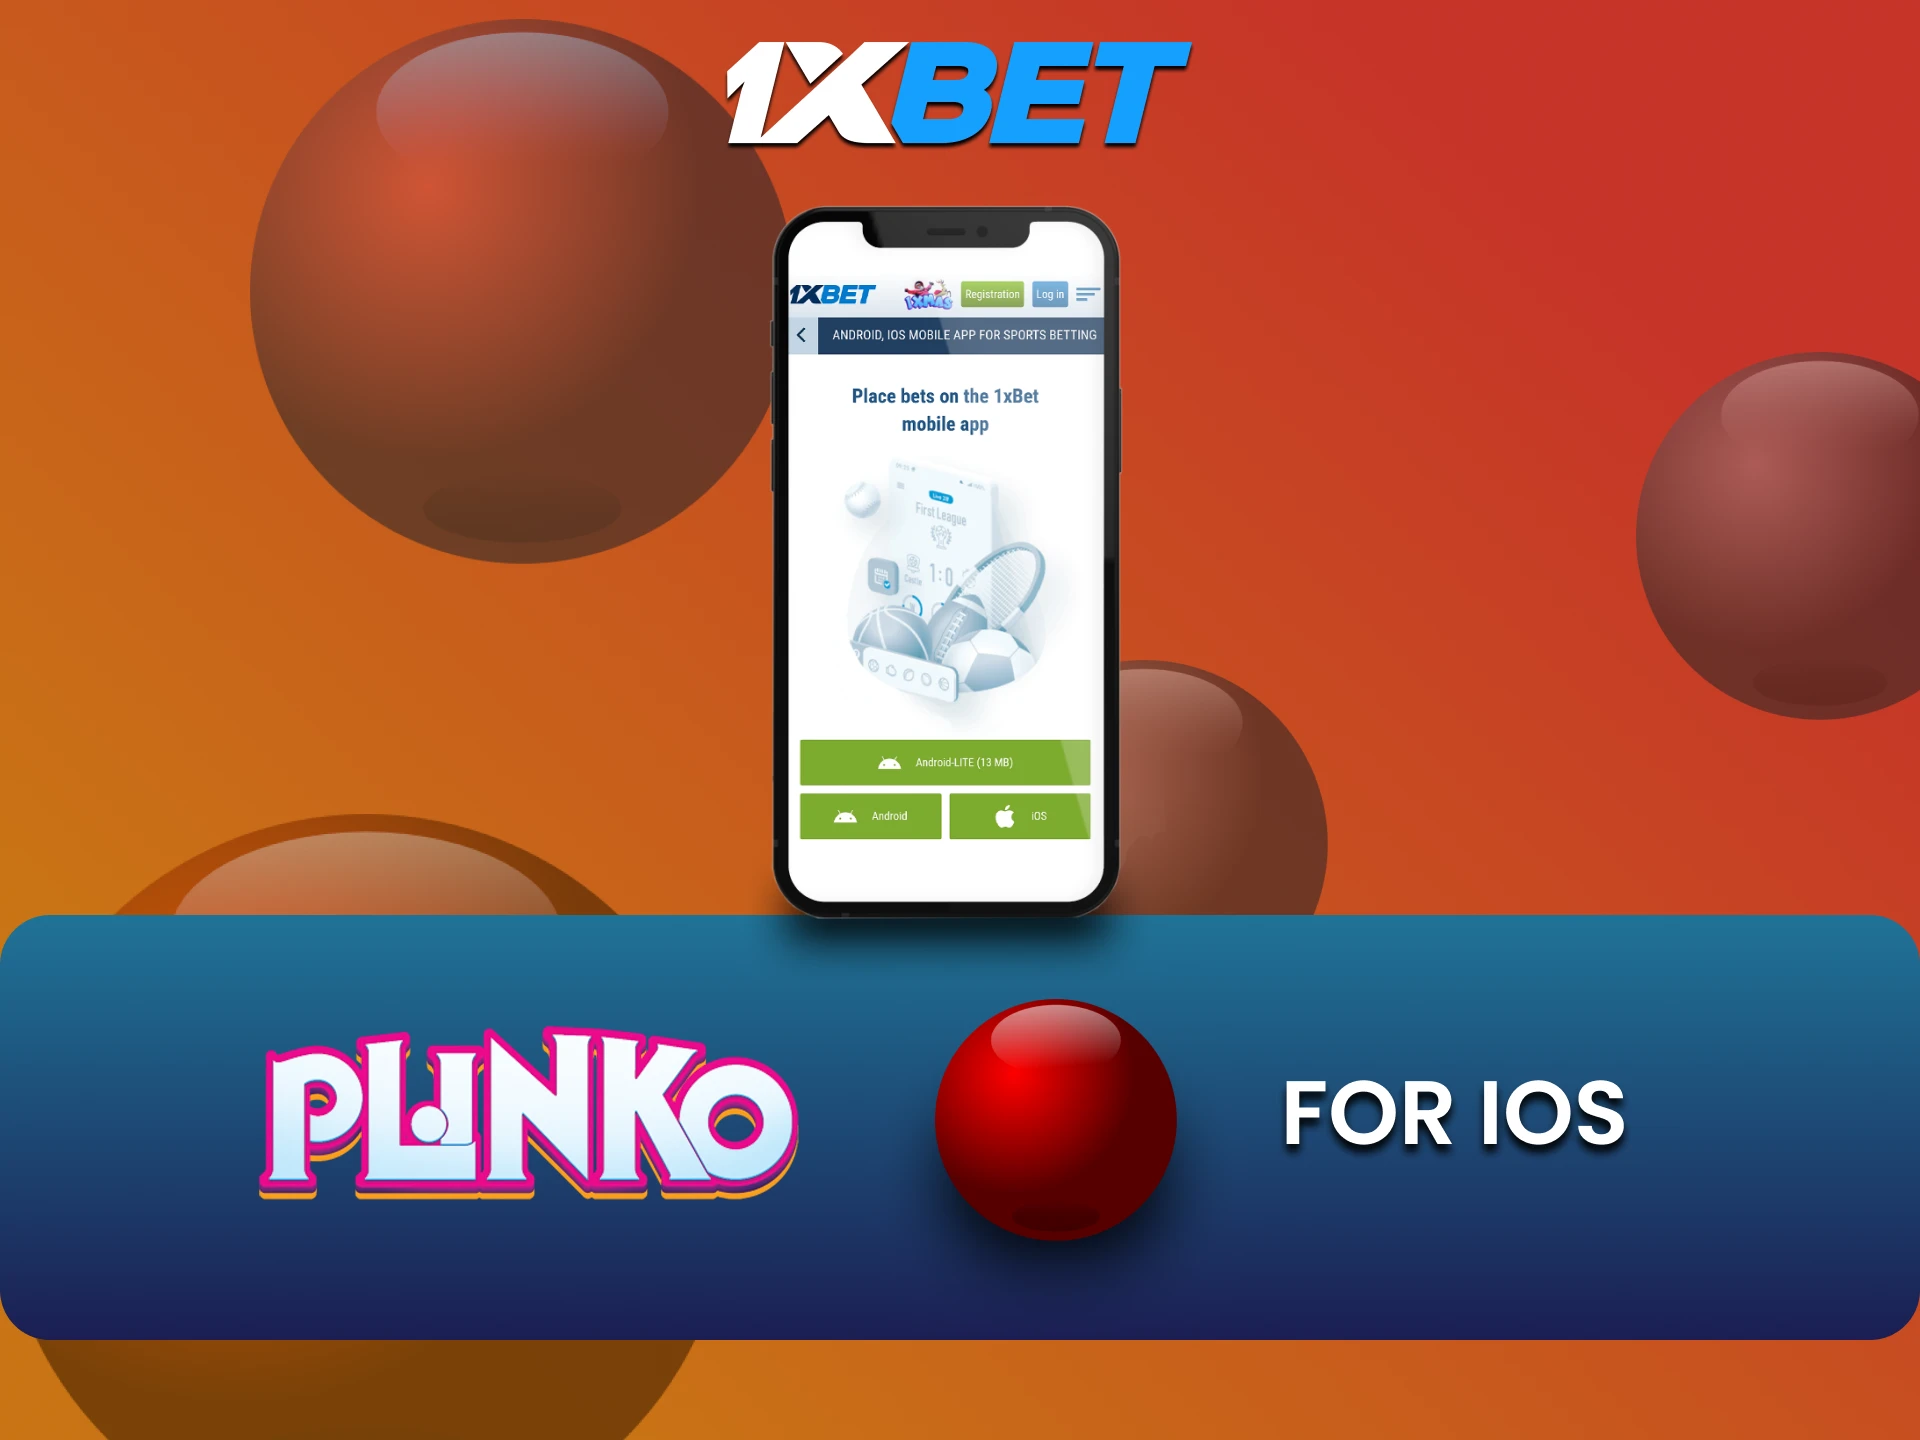 Download the 1xbet app to play Plinko on iOS.